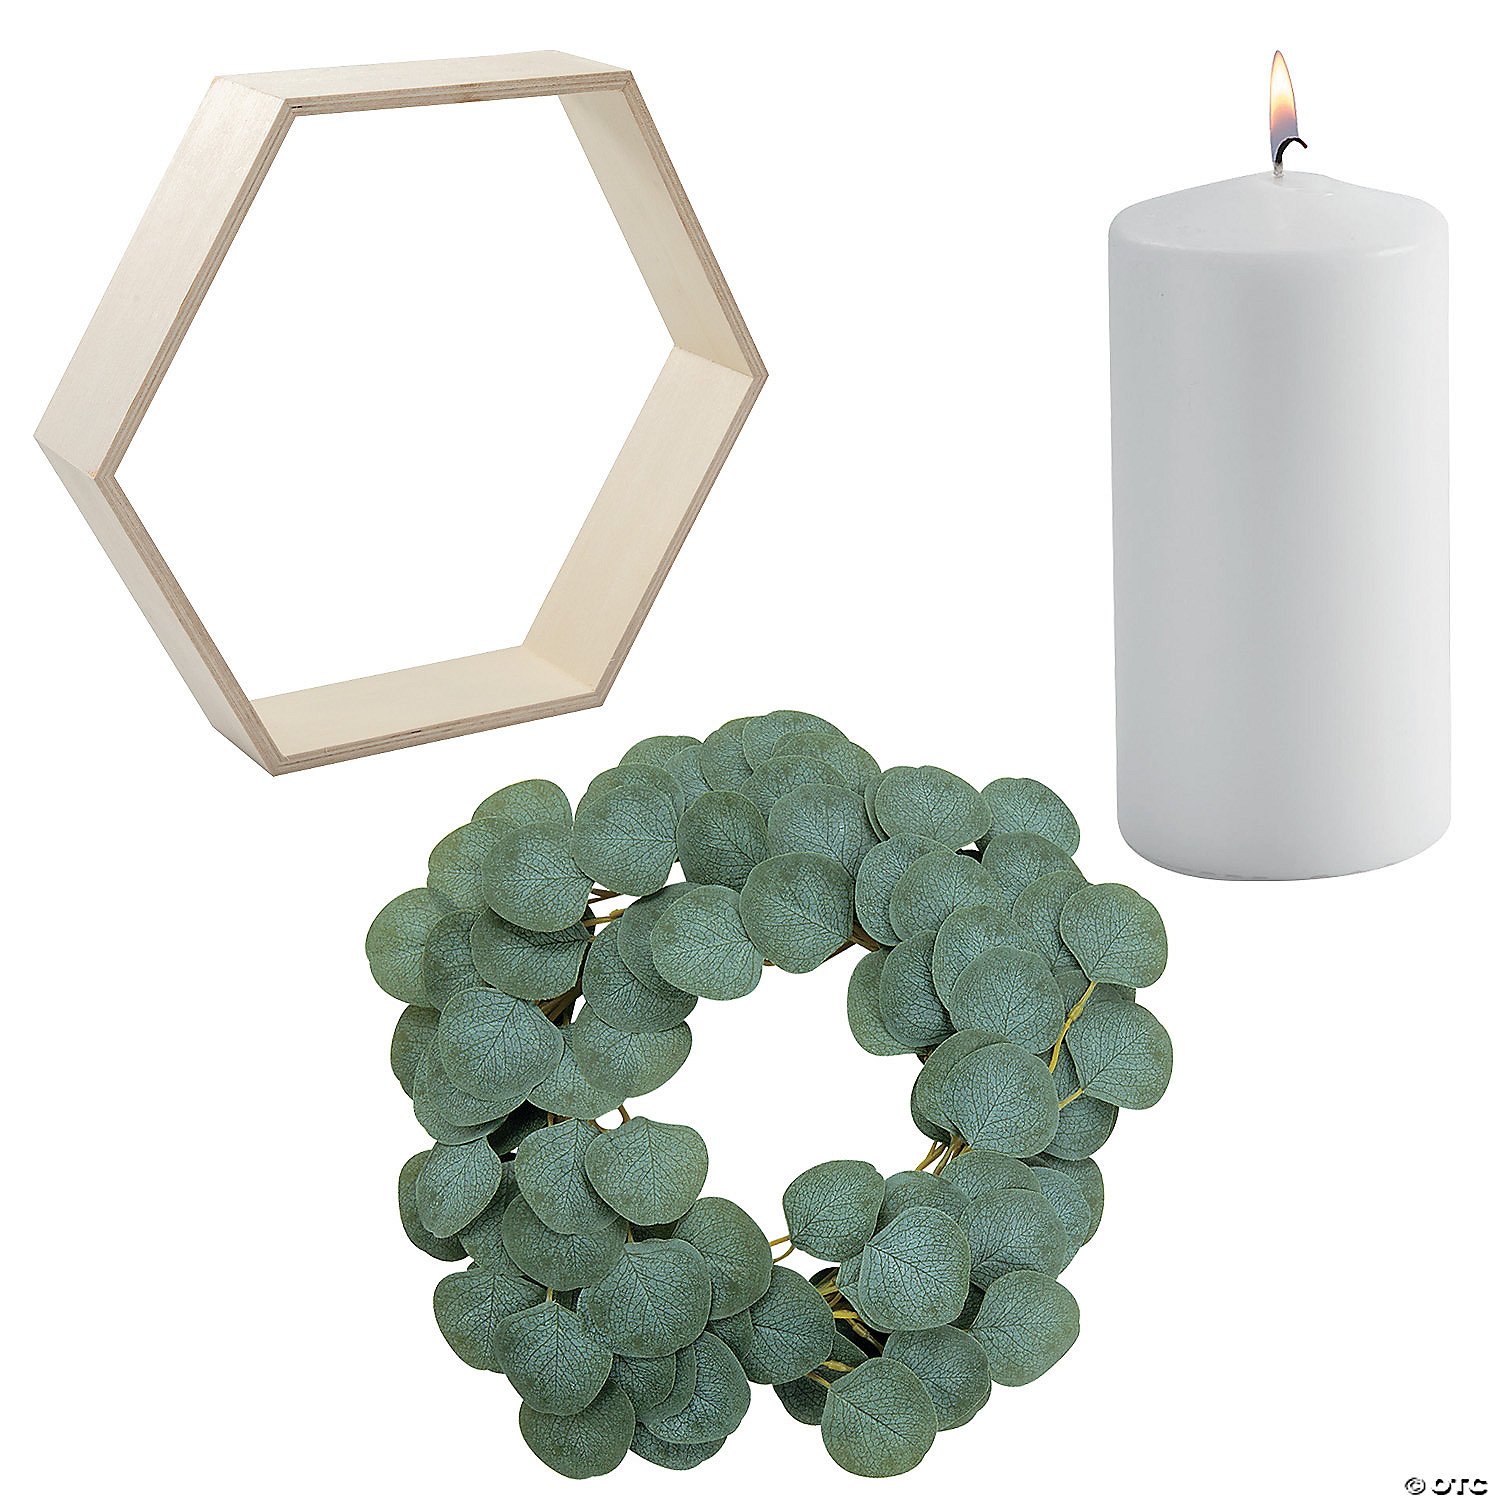 Rose Morning B009: Honeycomb &amp; Eucalyptus Wedding Centerpiece Kit is the perfect wedding centerpiece set that is very simple and easy to assemble. Simply insert the honeycomb into the vase and add eucalyptus branches for a beautiful and elegant wedding tabletop in no time.